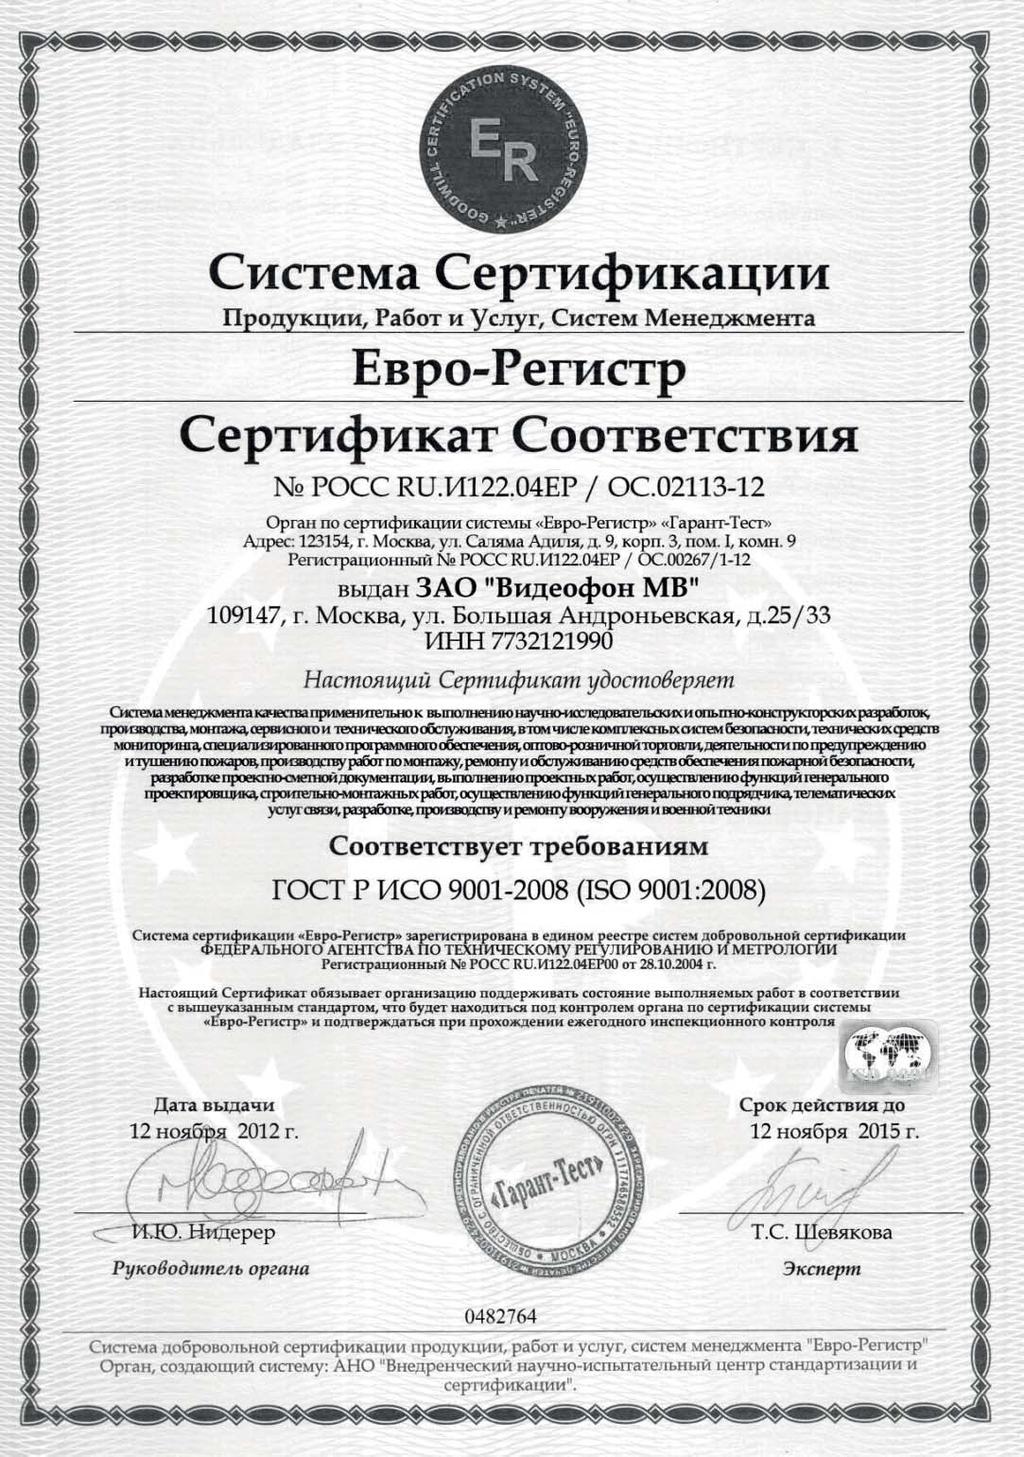 Telematic Communication Services License. 5. Weapons And Military Equipment Engineering License 6. Weapons And Military Equipment Manufacturing License 7.